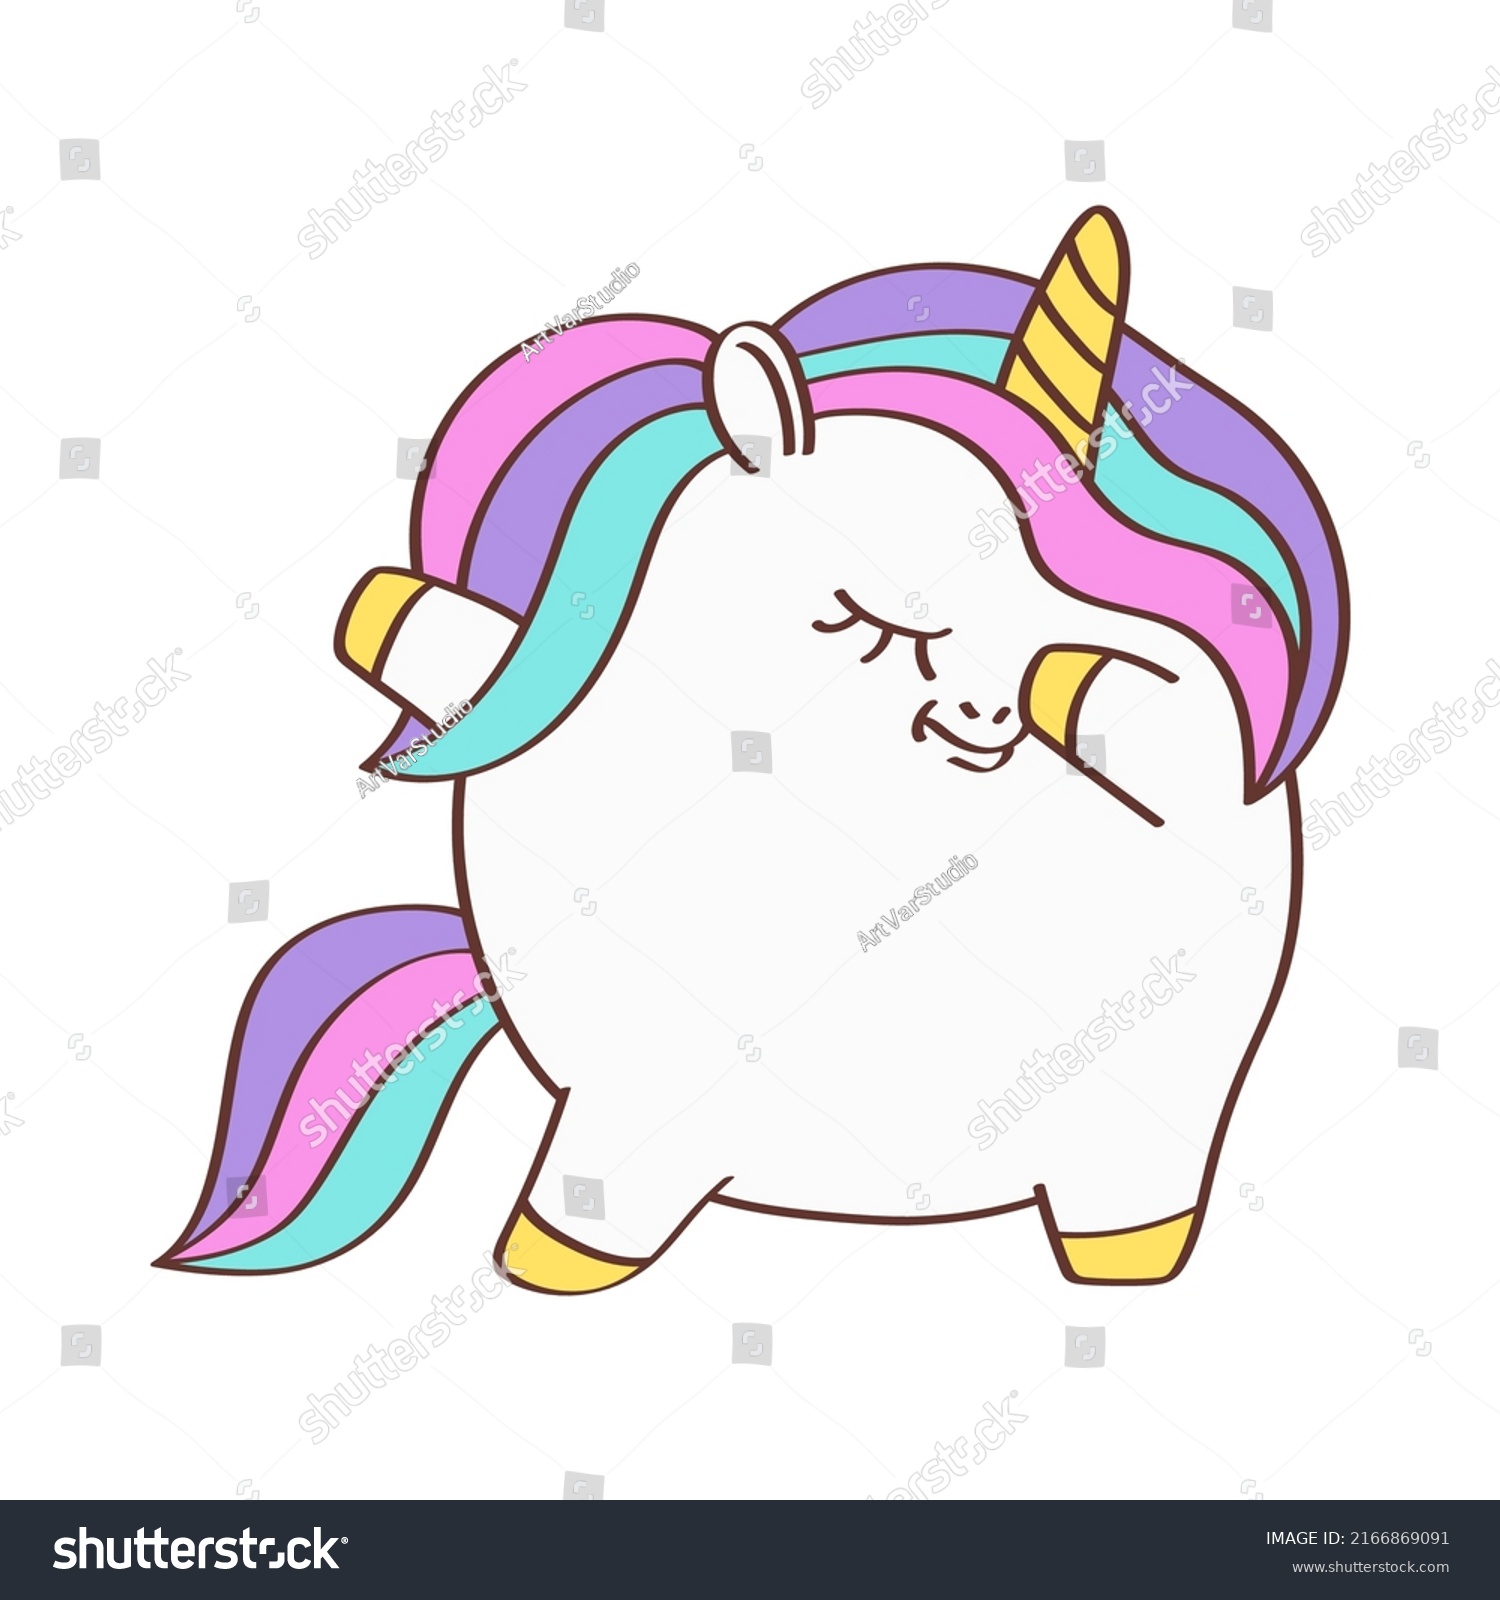 SVG of Clipart Unicorn Plump in Cartoon Style. Cute Clip Art Unicorn Fat. Vector Illustration of an Animal for Stickers, Baby Shower Invitation, Prints for Clothes, Textile svg